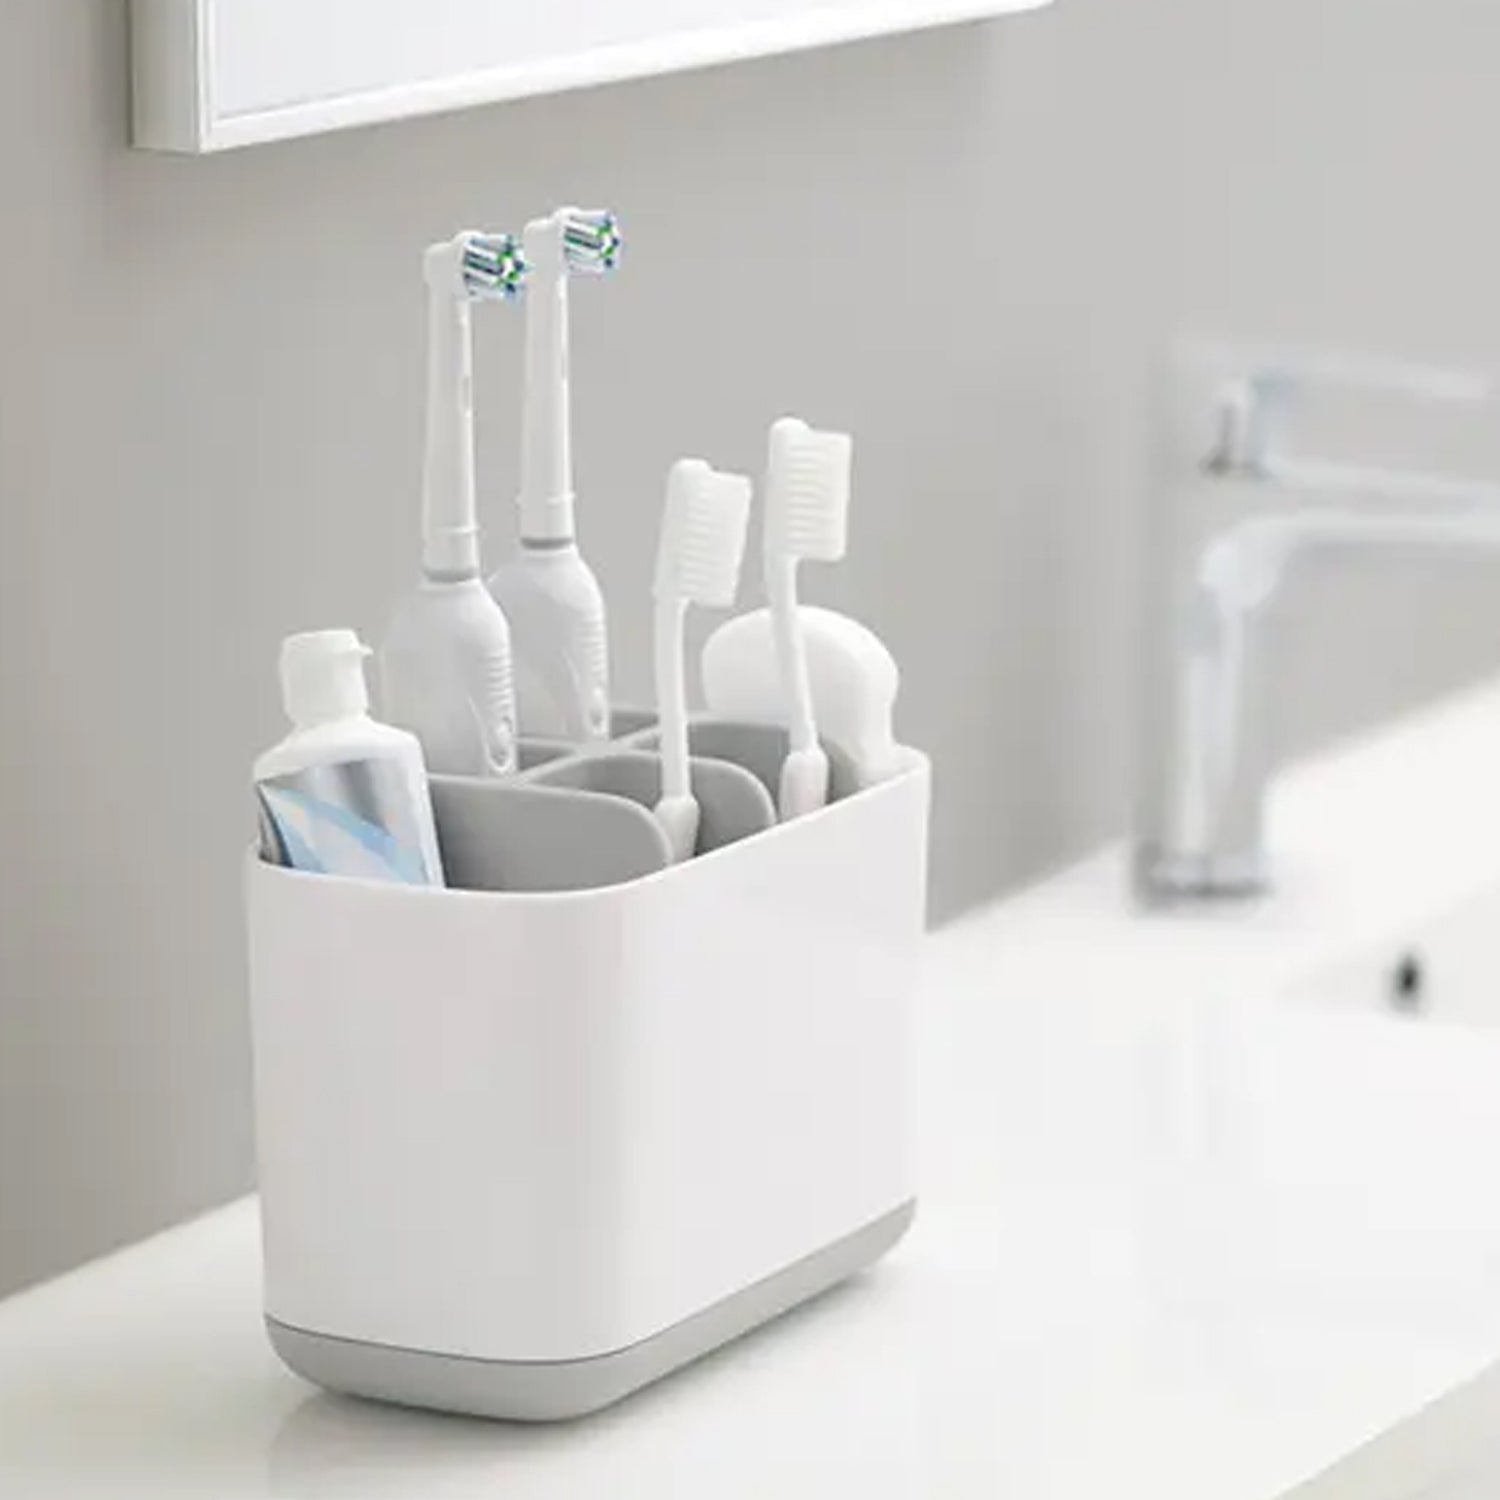 7698 Toothbrush Holder Stand Bathroom Storage Organizer Caddy For Toothpaste, Tongue Cleaner, Toiletry, and Razor Shaving Kit Holder DeoDap